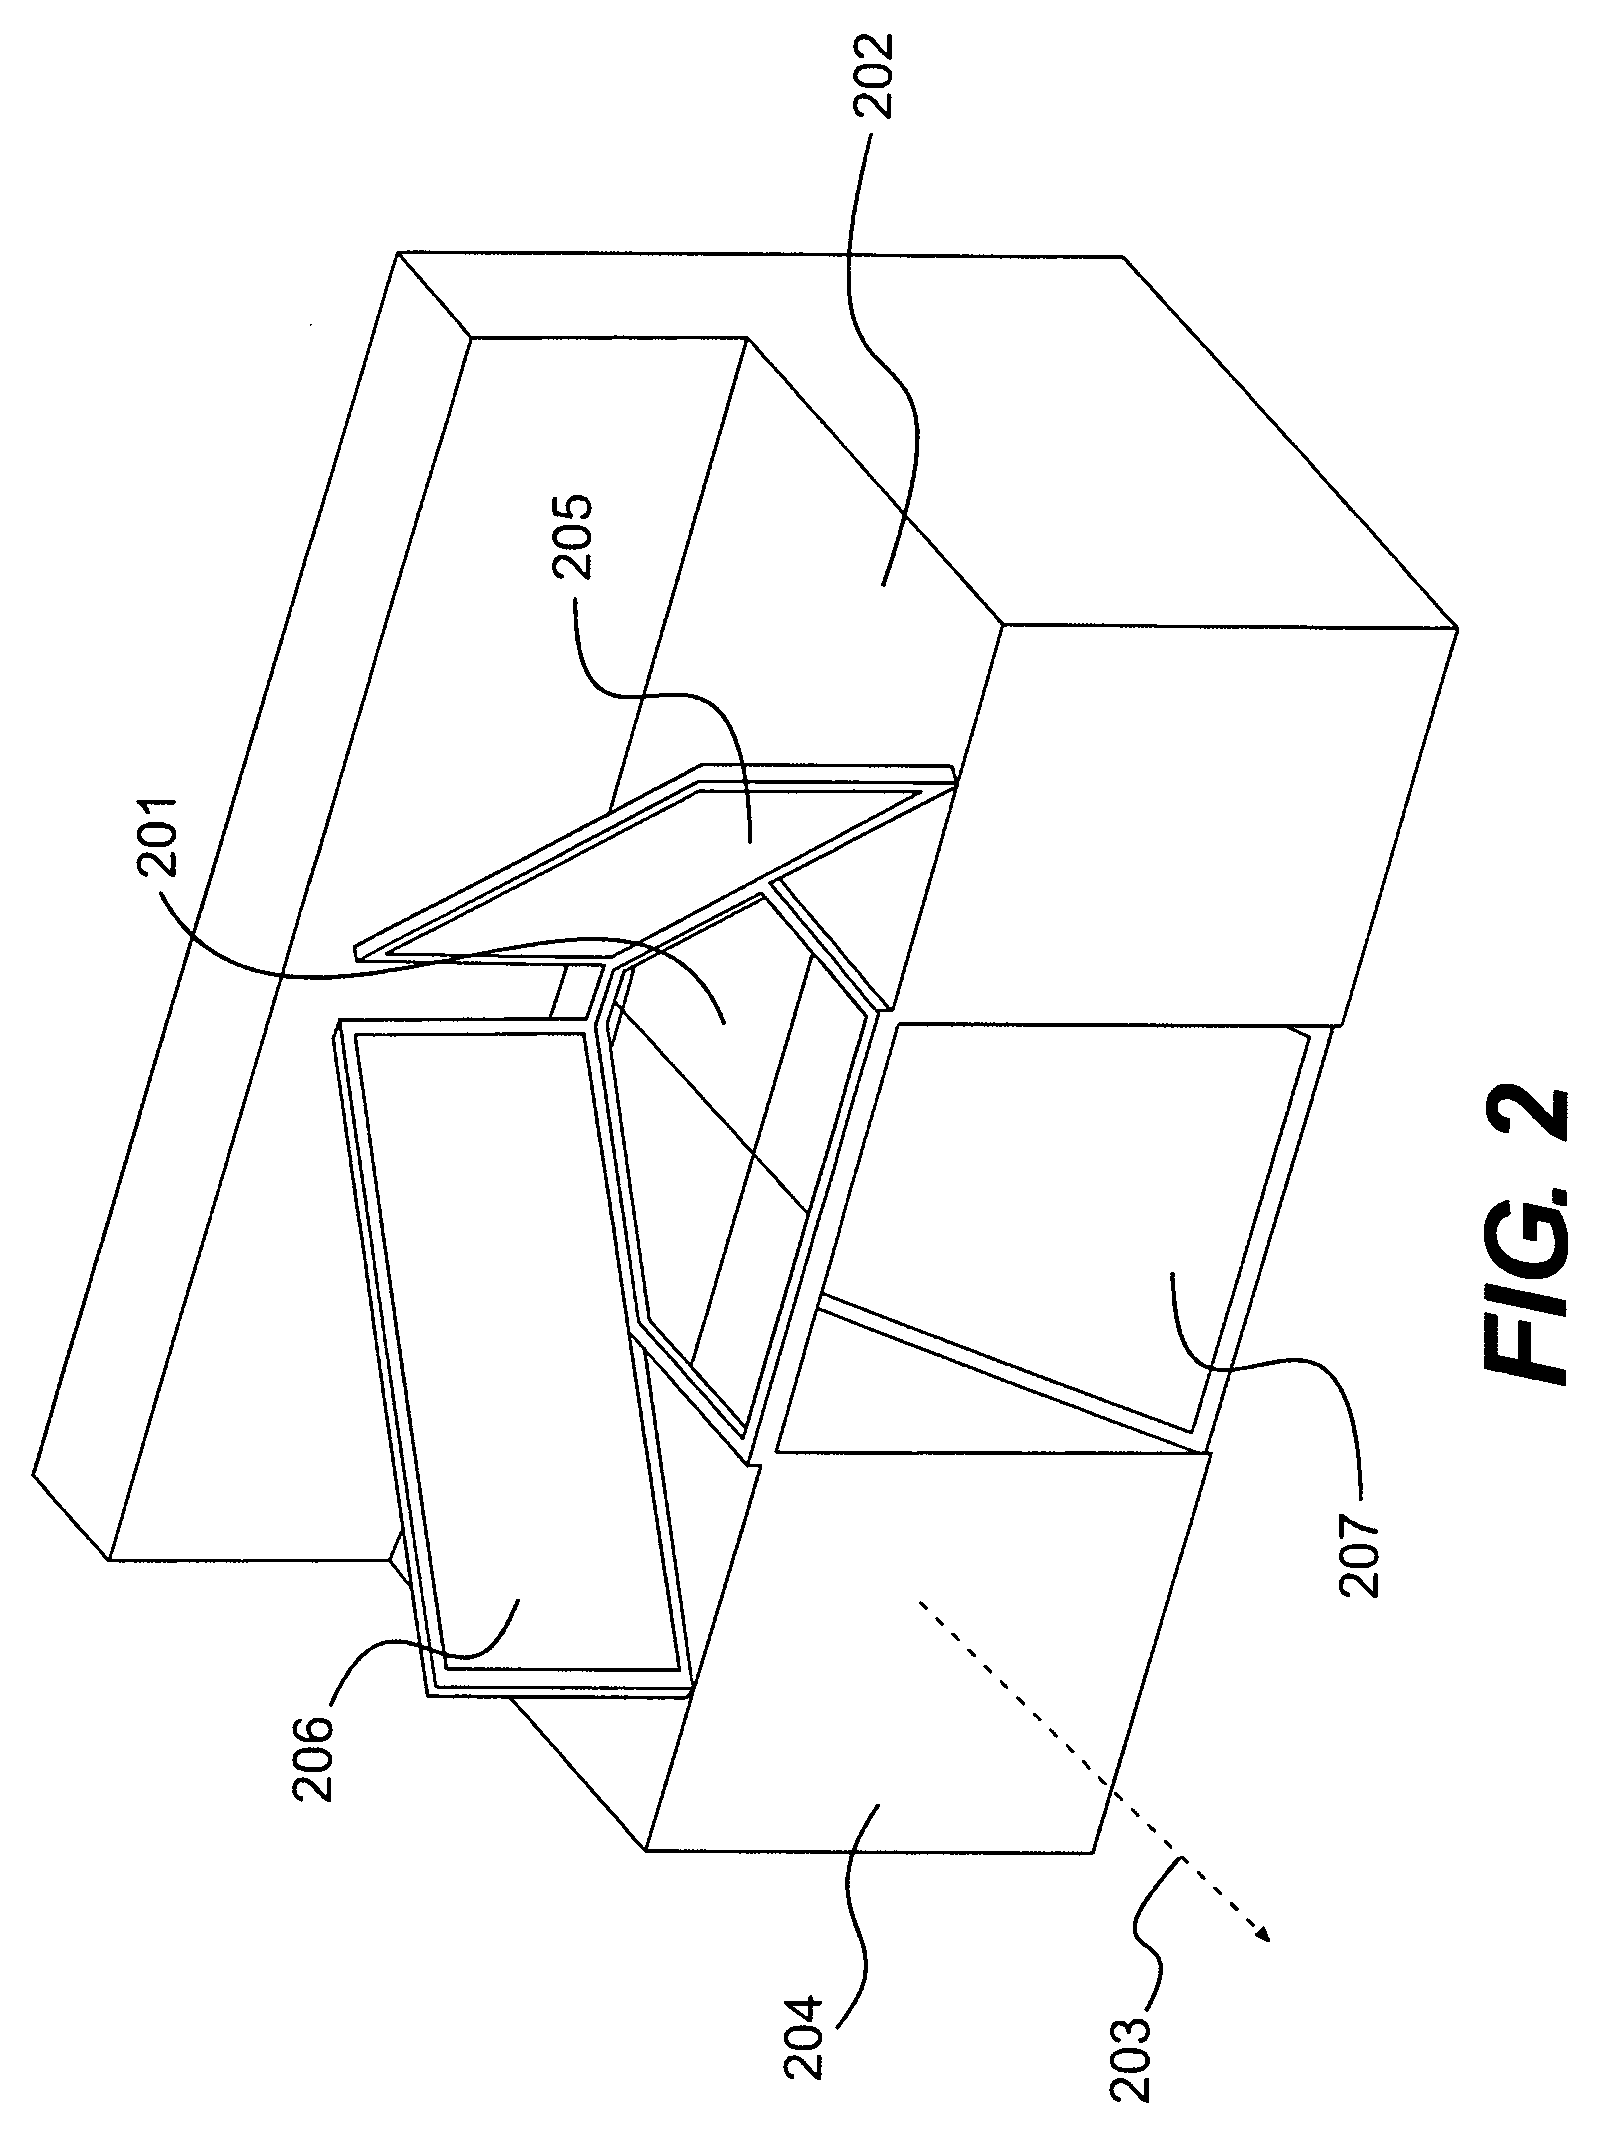 Method and system for foot shape generation